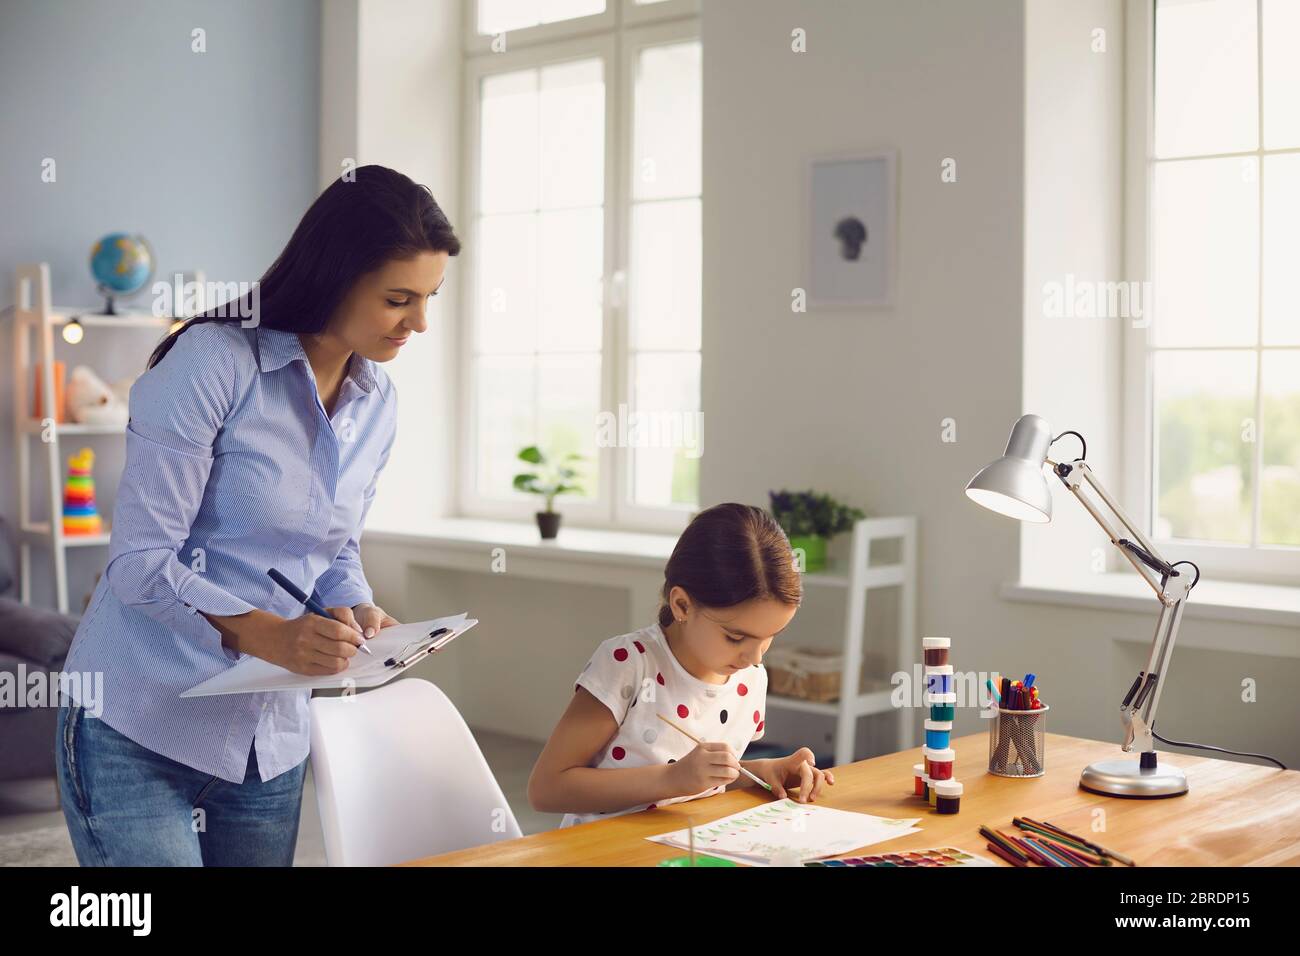 Child psychologist psychology. A woman psychologist with a clipboard works with a little girl patient in a children's room. The psychological assistan Stock Photo